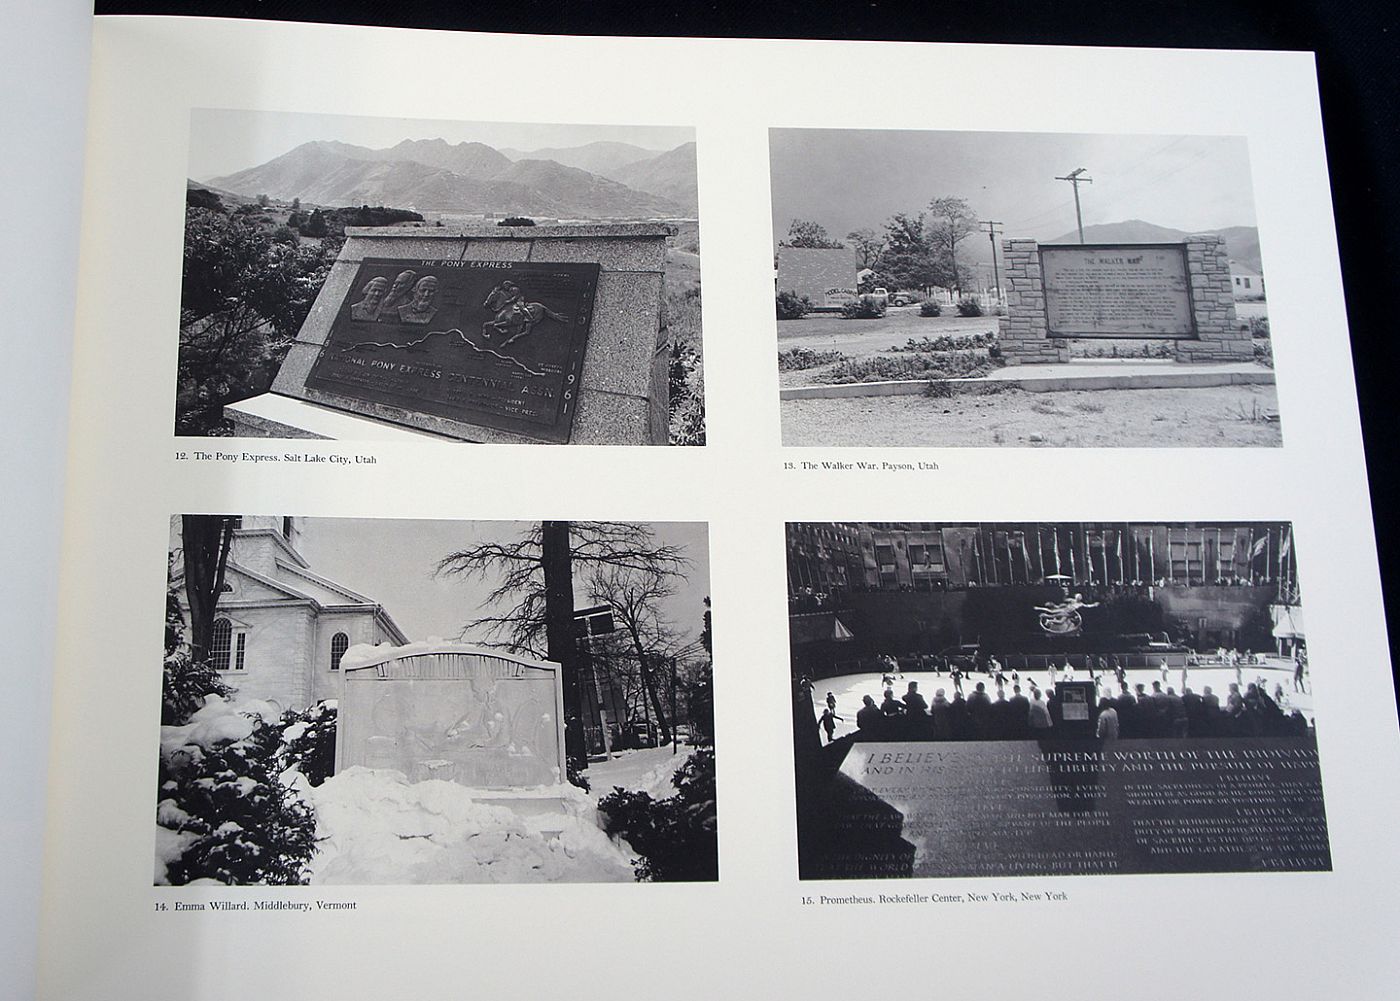 Lee Friedlander: The American Monument (Special Limited Edition with One Vintage Gelatin Silver Print)